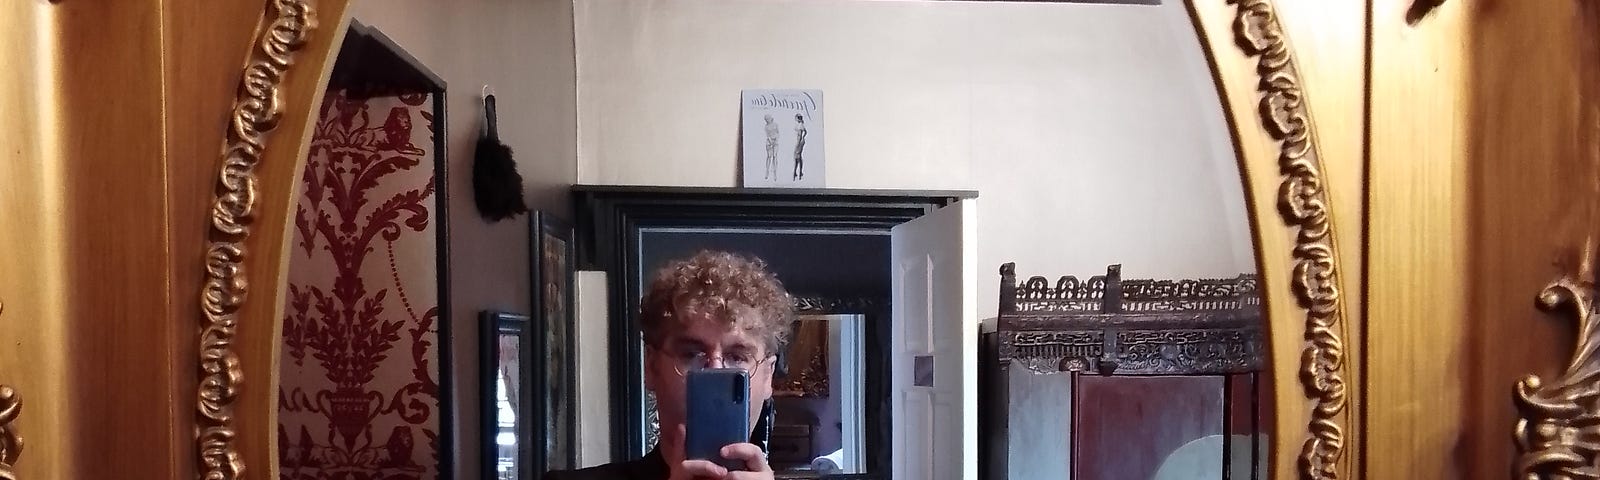 The author taking a photo of himself in a mirror with intricately carved frame.